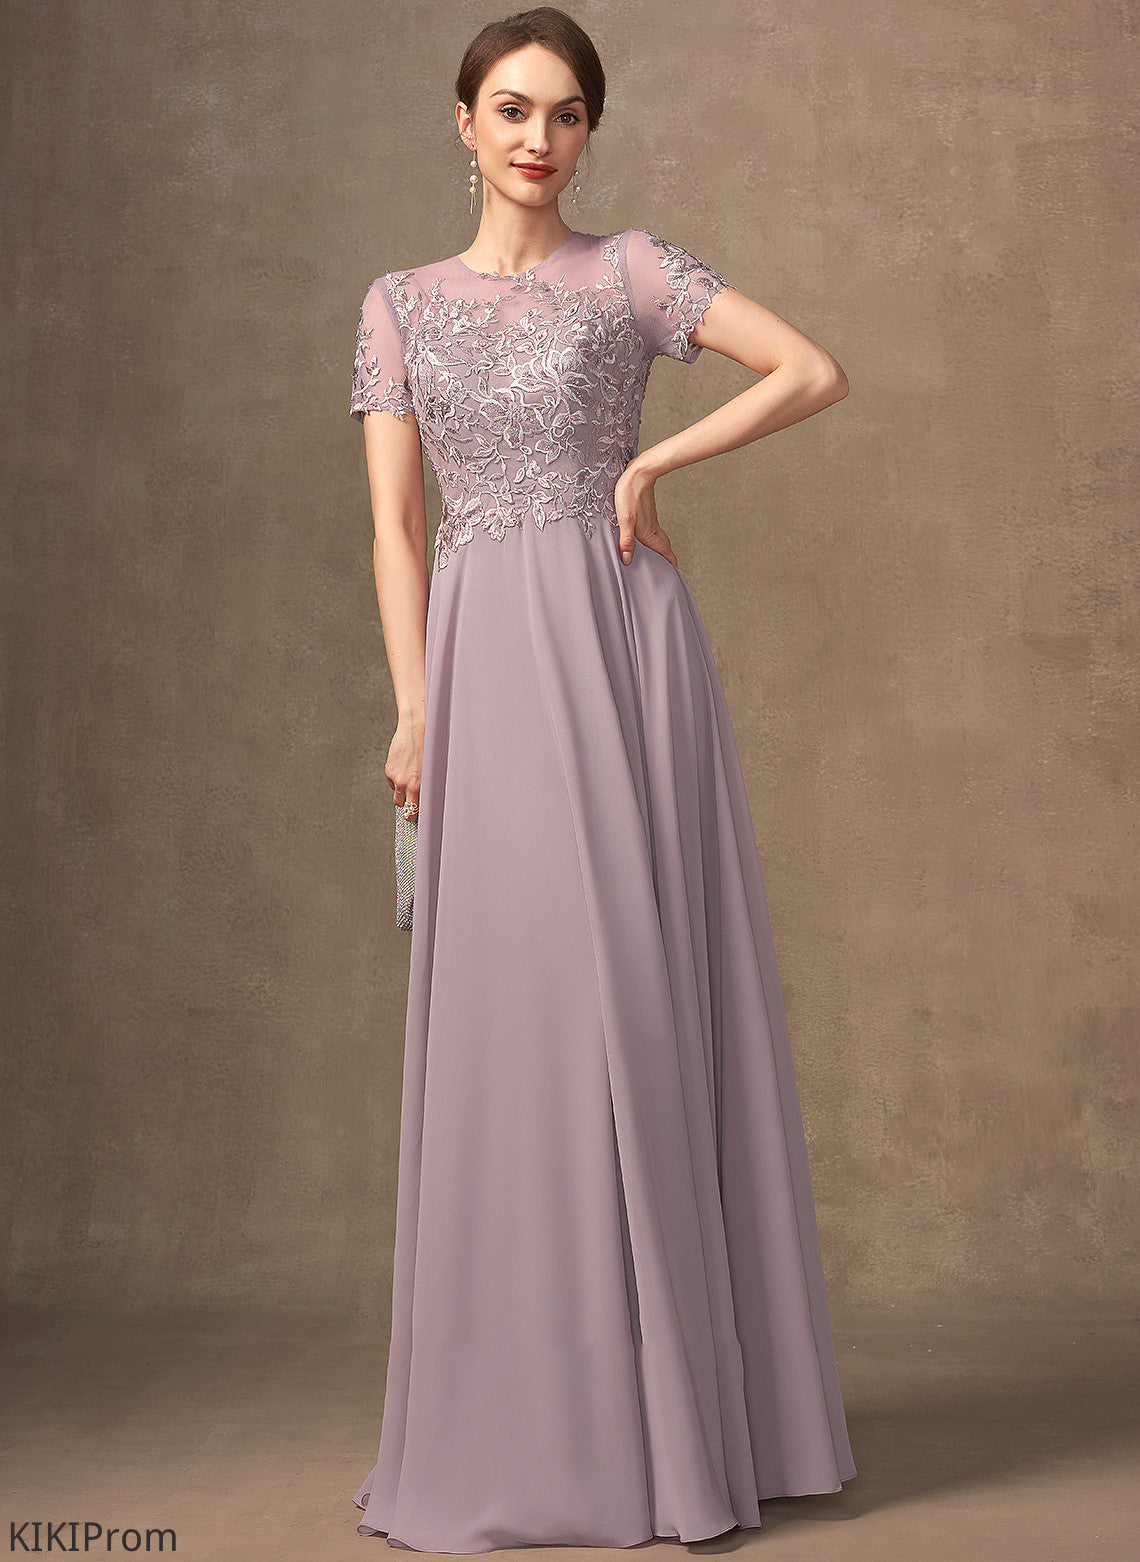 Lace Dress Chiffon Bride Taryn Mother Beading the A-Line Scoop Mother of the Bride Dresses With Sequins Neck of Floor-Length